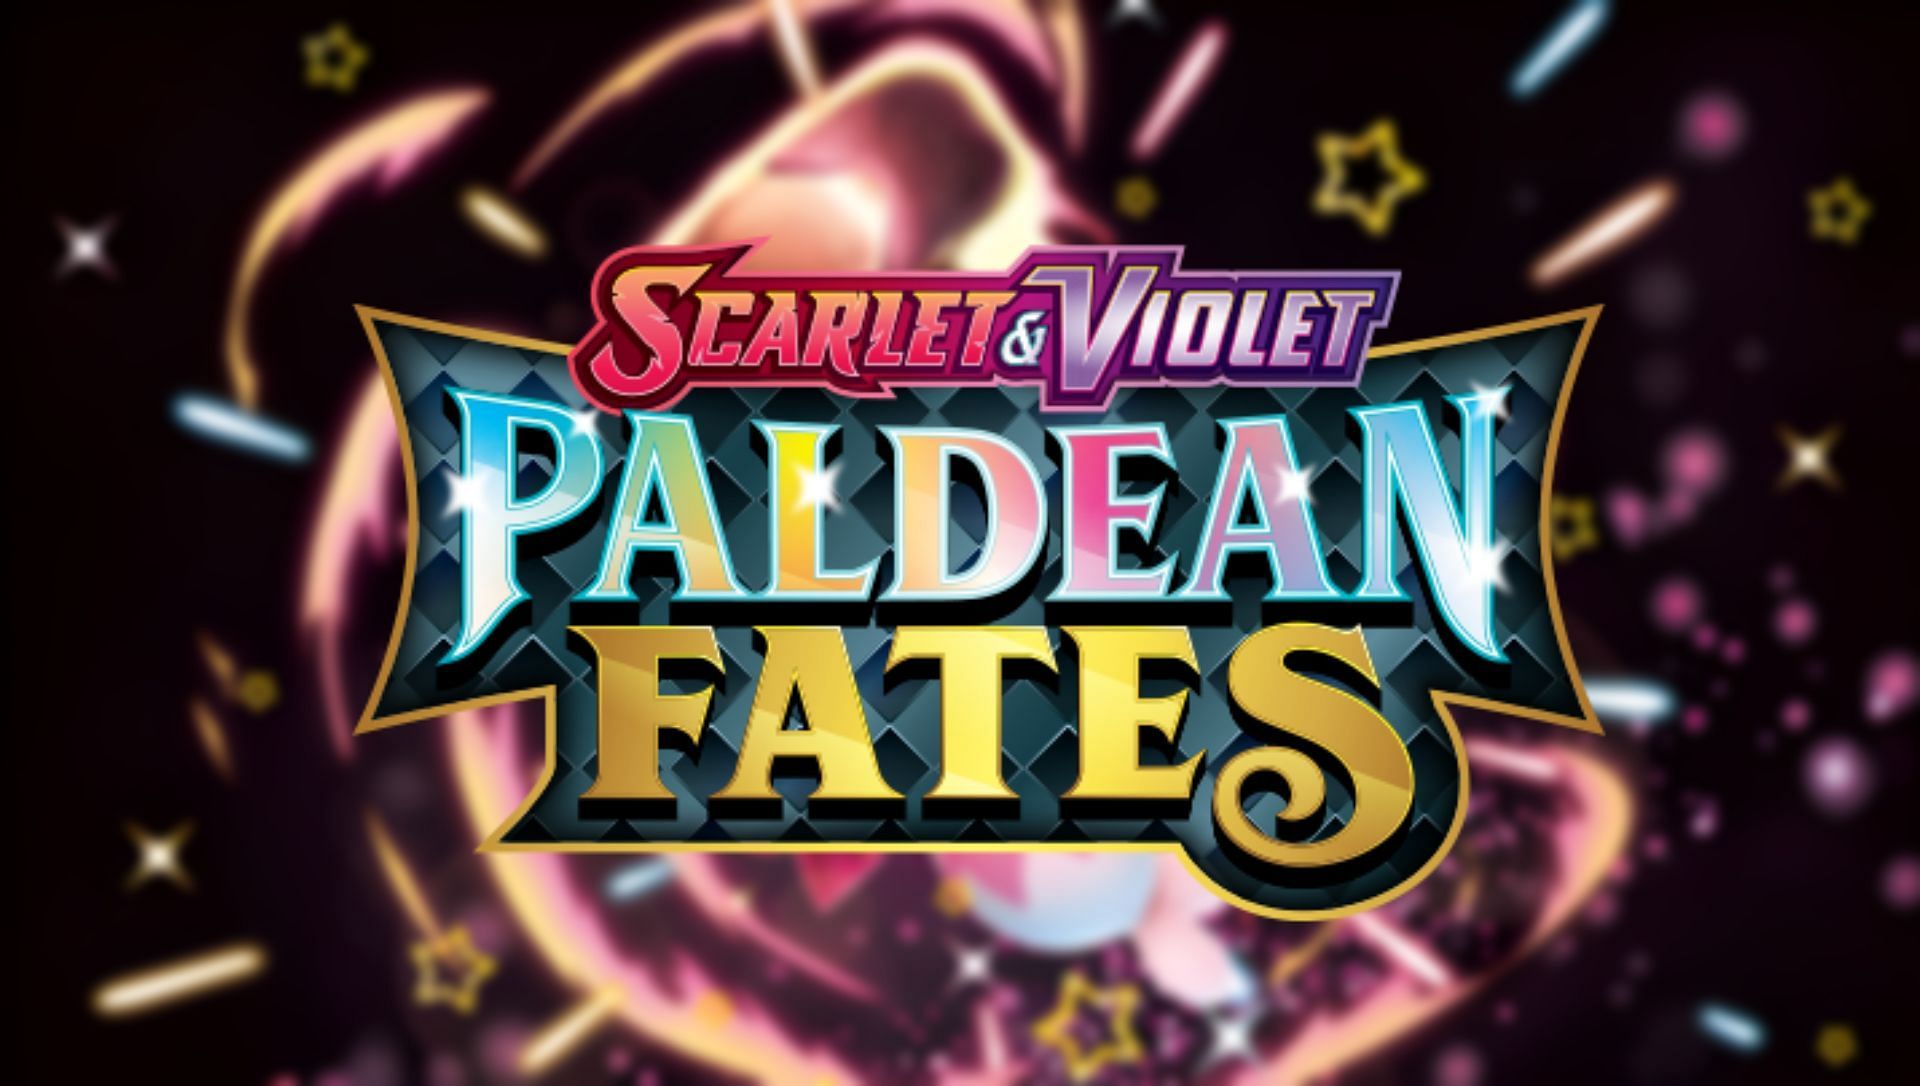 The logo of the Pokemon TCG Paldean Fates expansion.